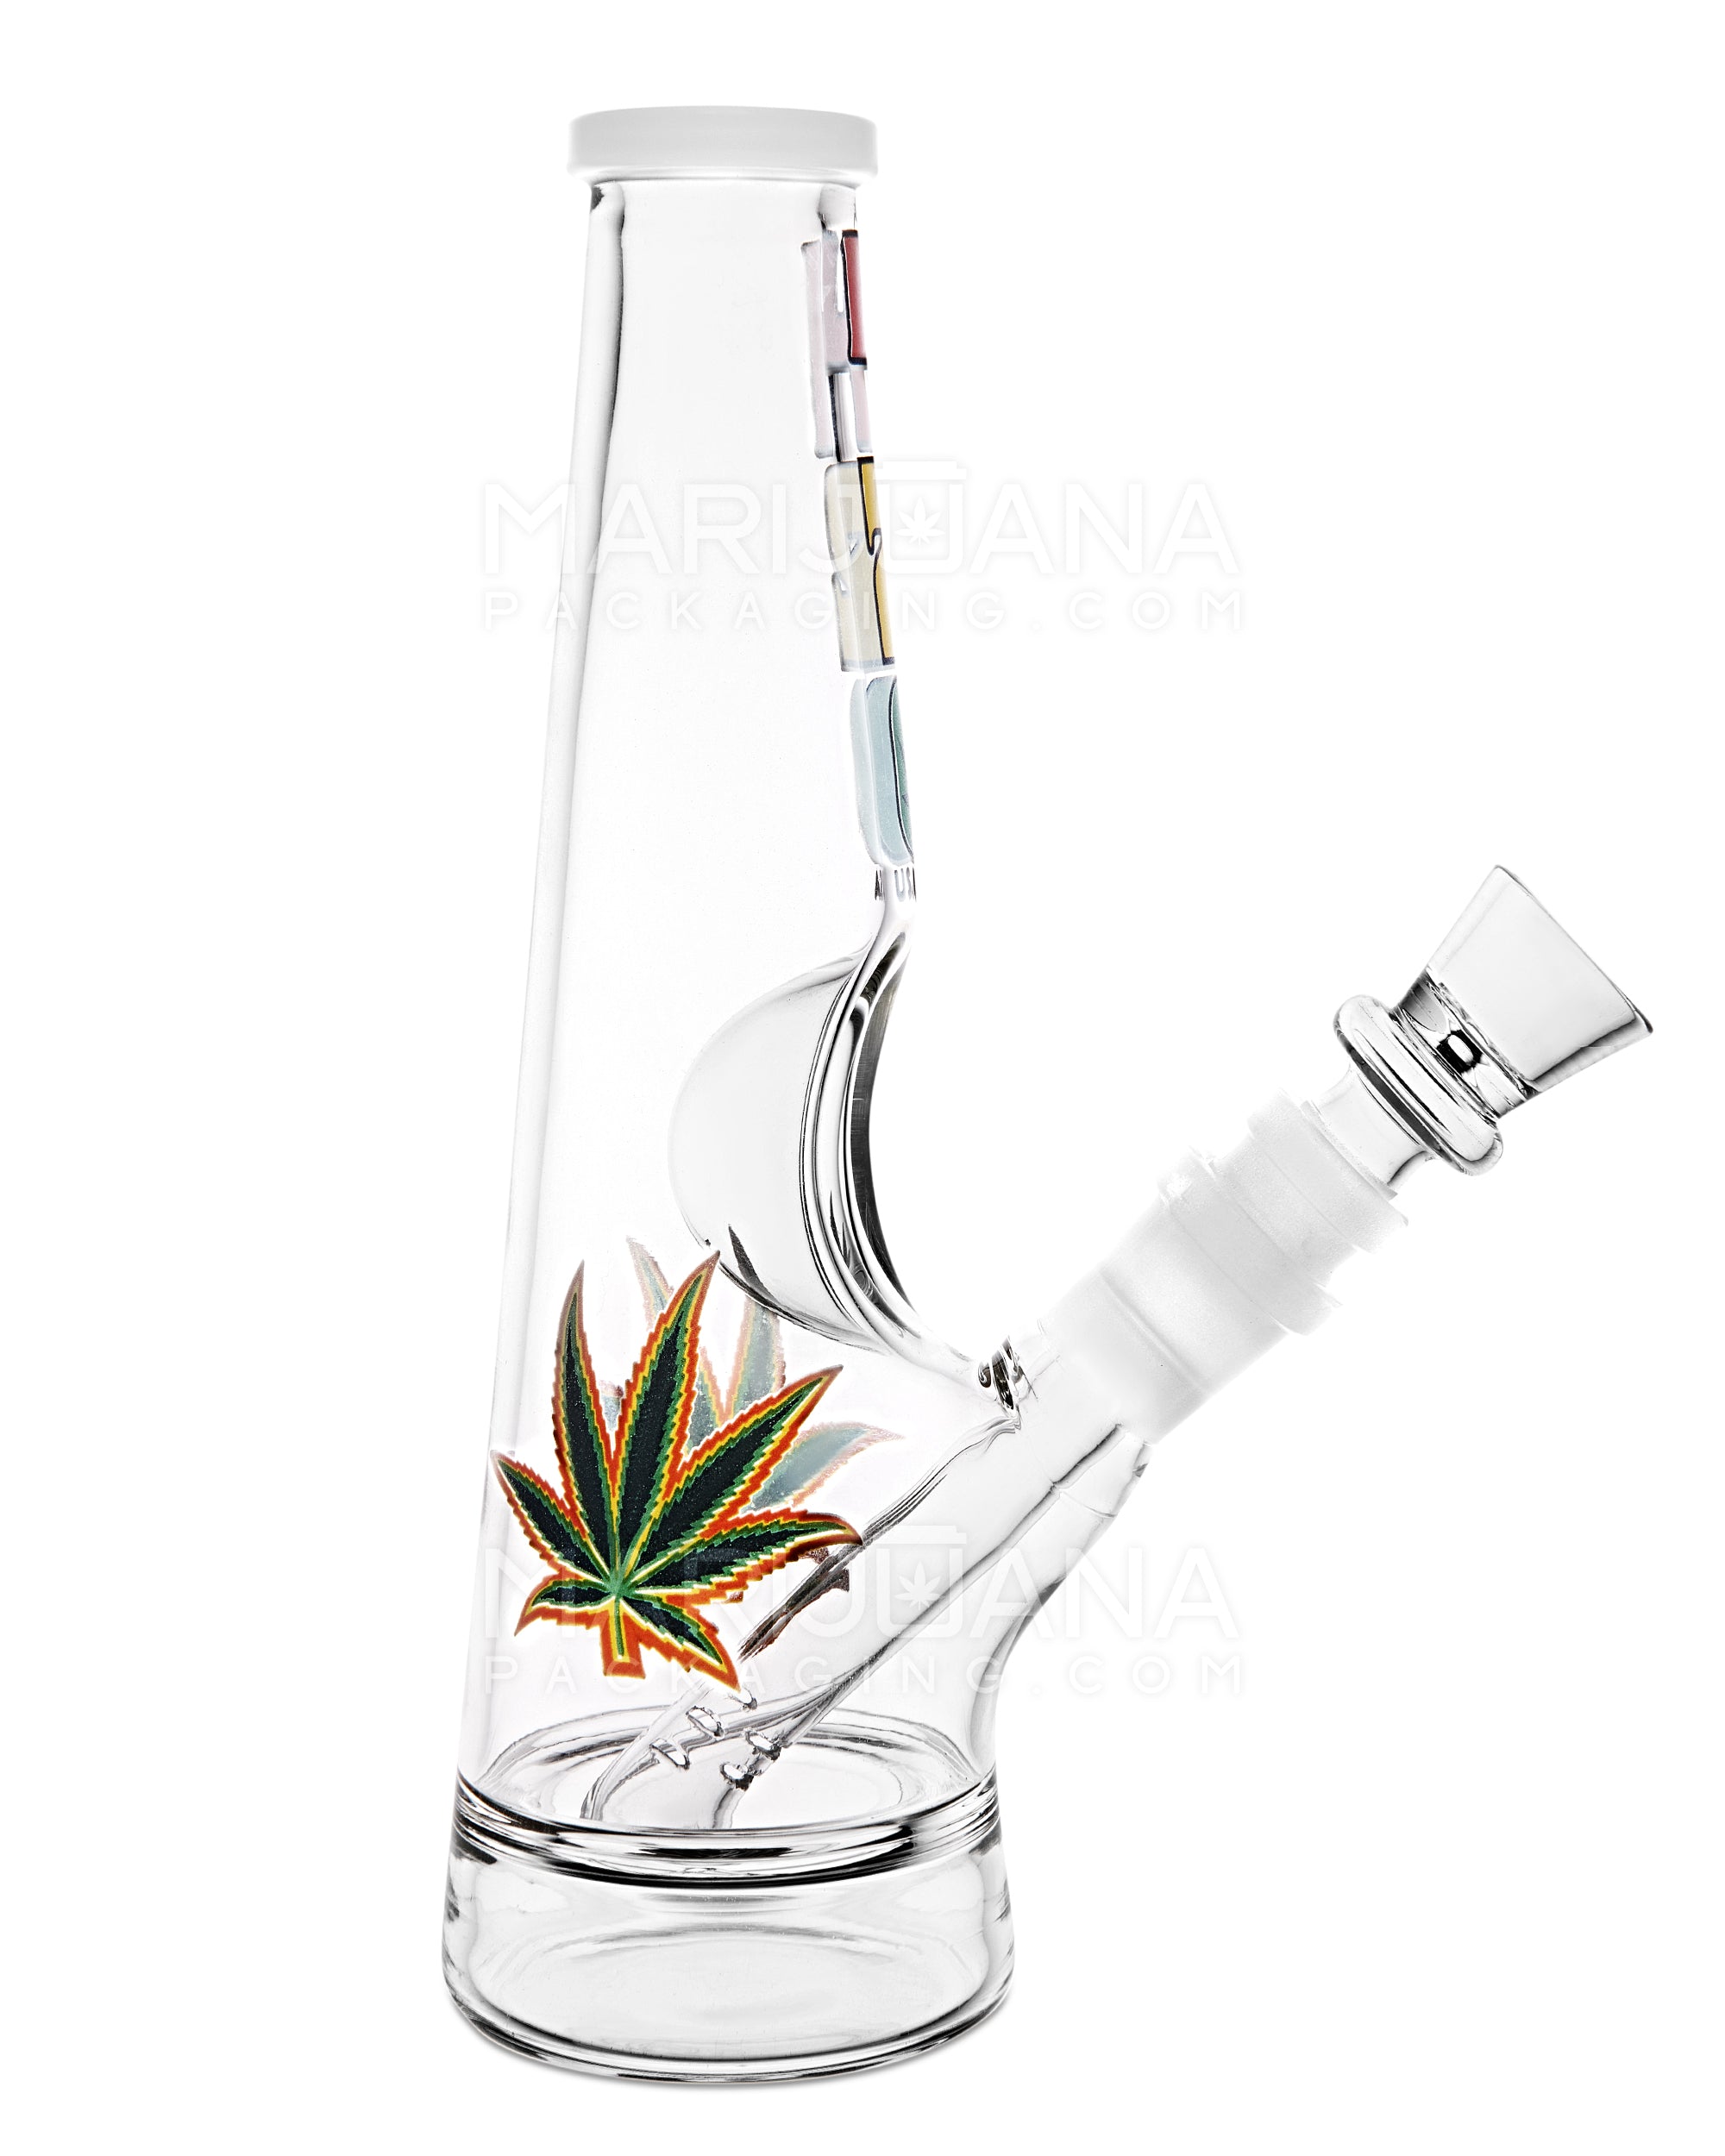 Straight Neck Decal Diffused Glass Cone Water Pipe w/ Ice Catcher | 8.5in Tall - 14mm Bowl - Assorted - 5